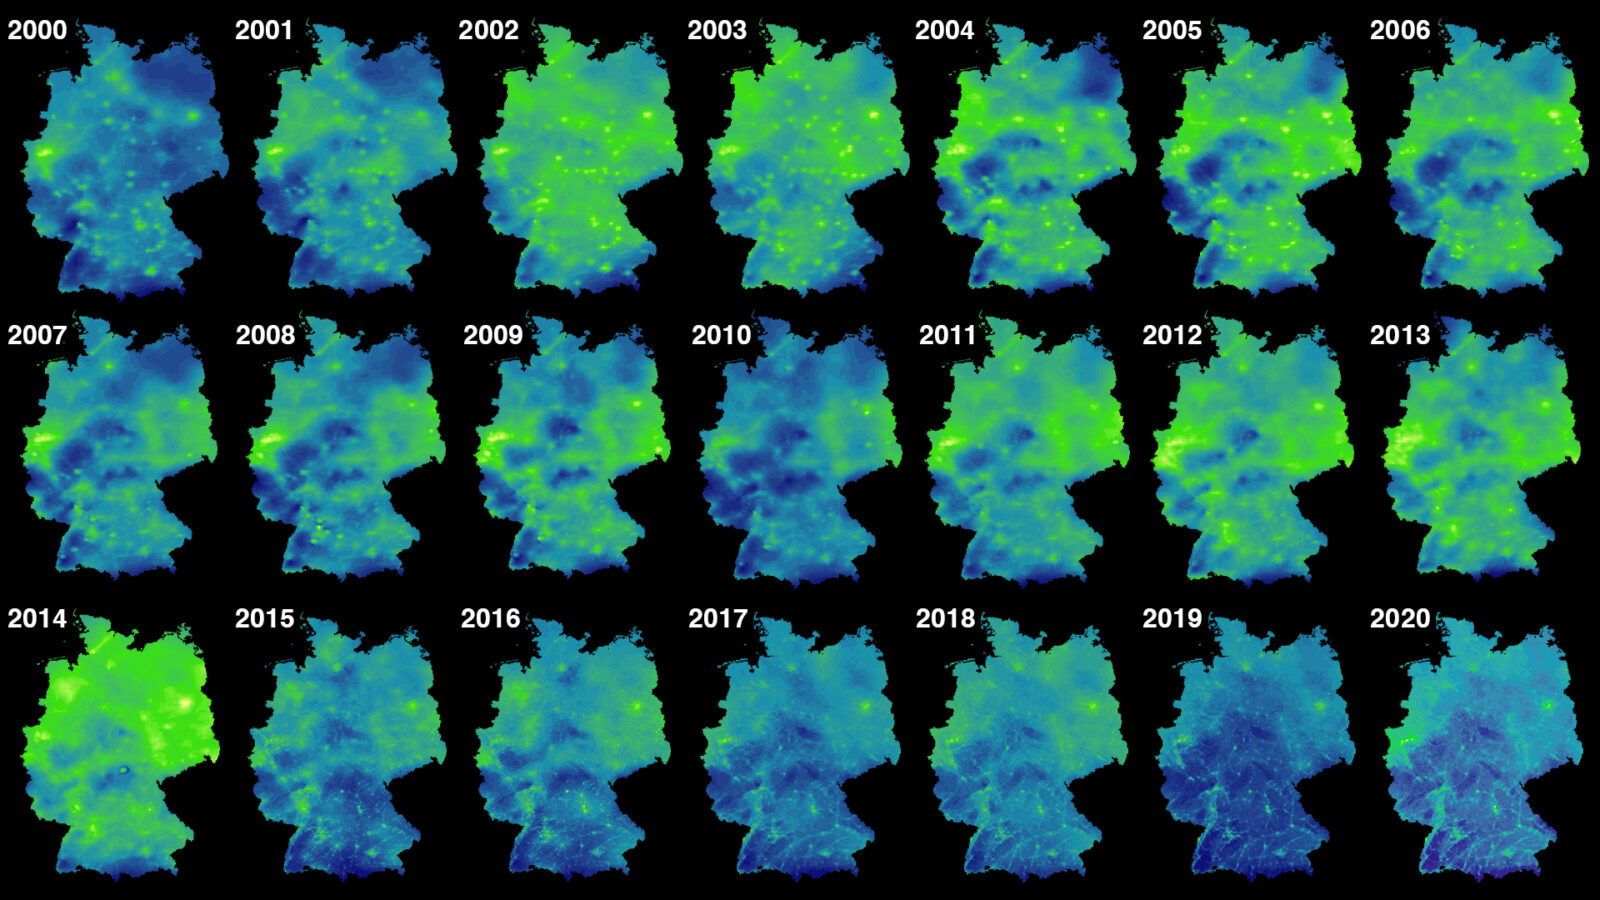 Data used in creation of the project. Heat maps of 21 years of air pollution in Germany from the year 2000 to 2020.